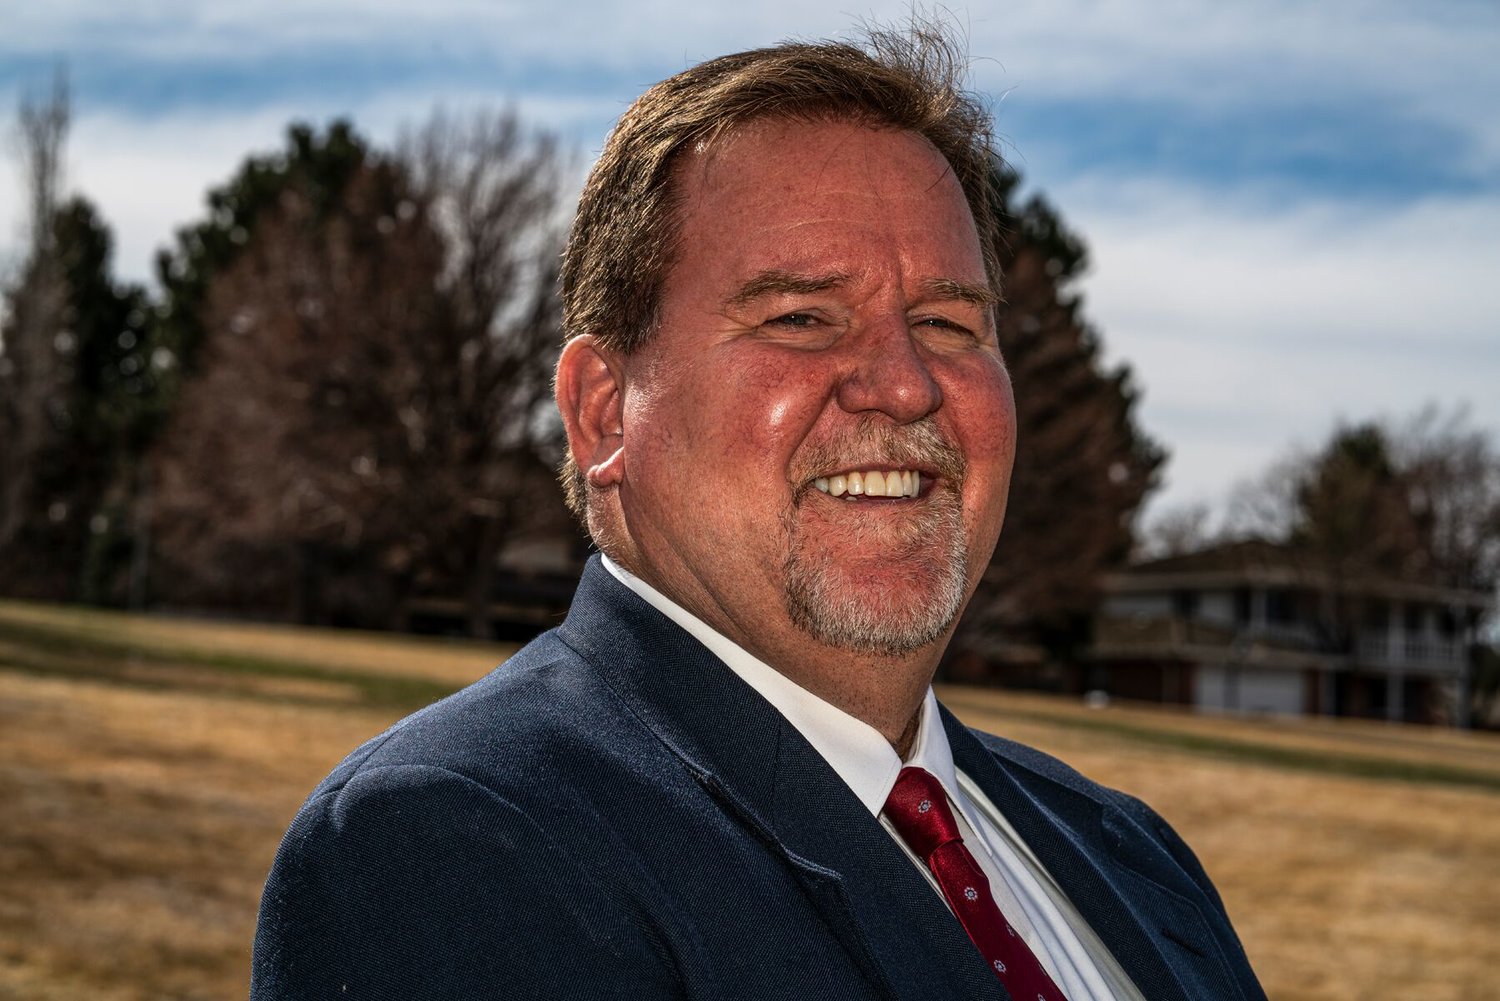 Election 2022: Andrews wants to be accessible to public as Arapahoe County assessor: Candidate with decades of real estate, appraisal experience runs to unseat incumbent in property tax office